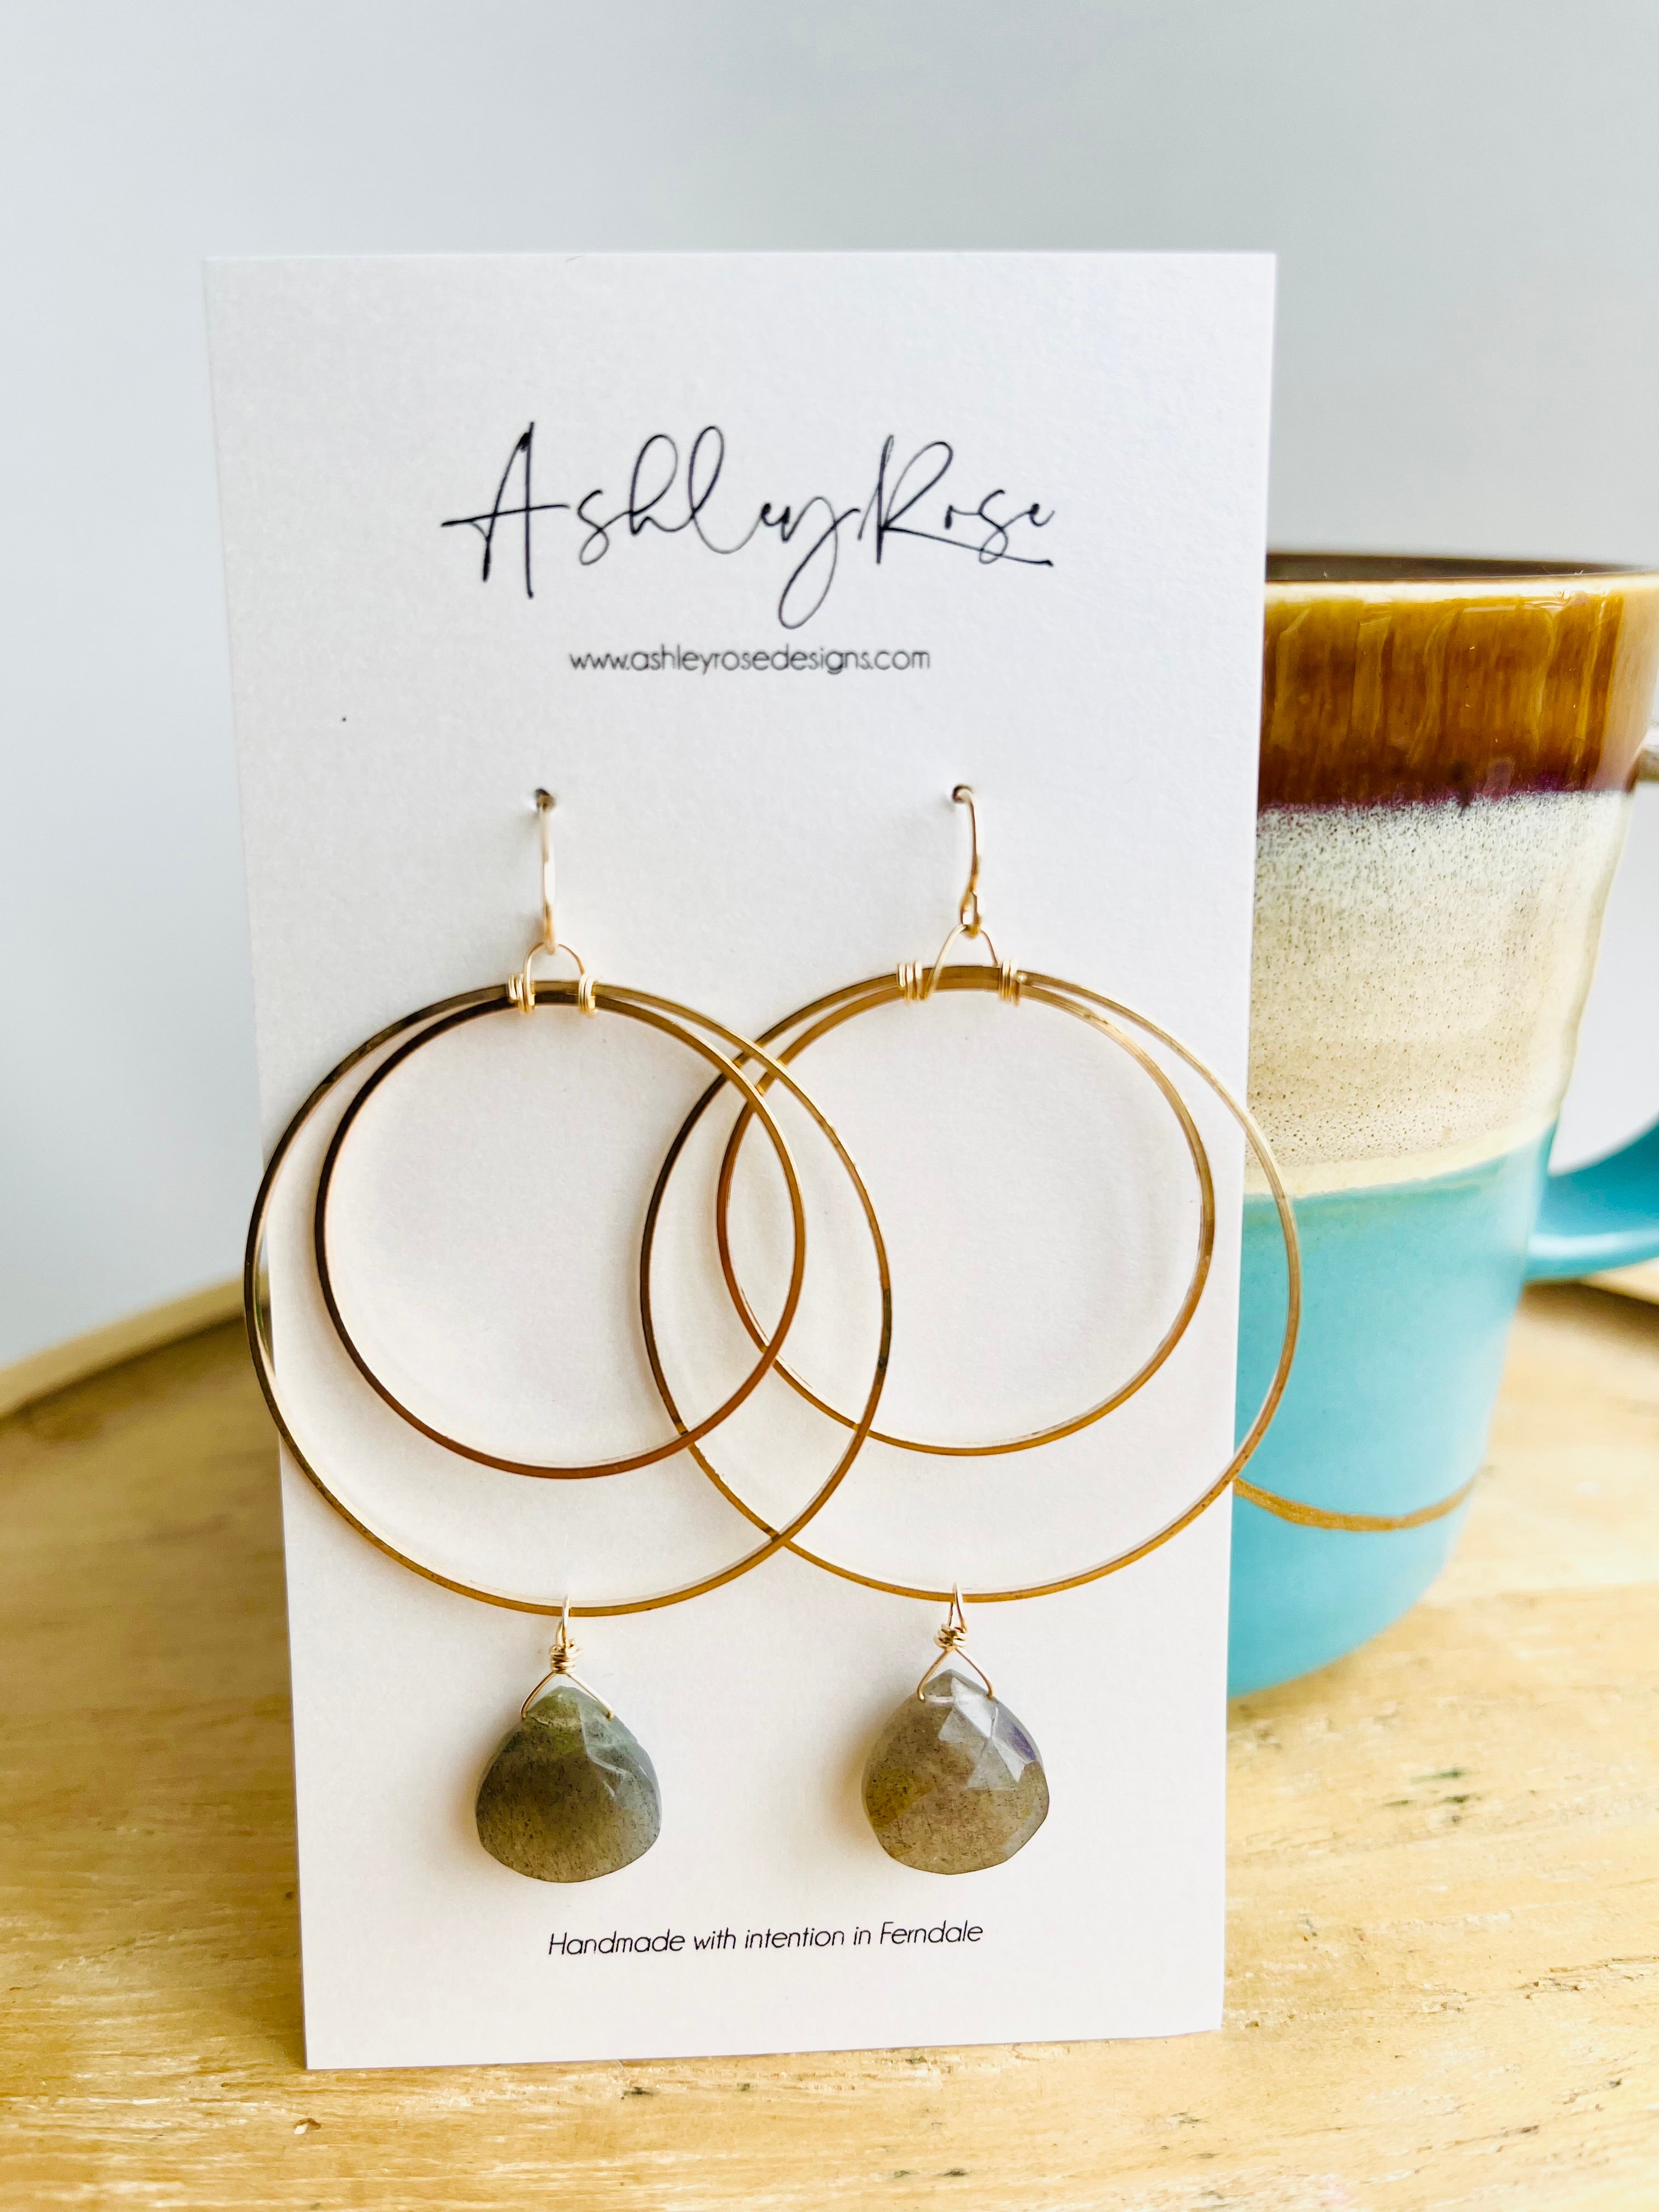 Halo gold with Labradorite - earrings from Ashley Rose